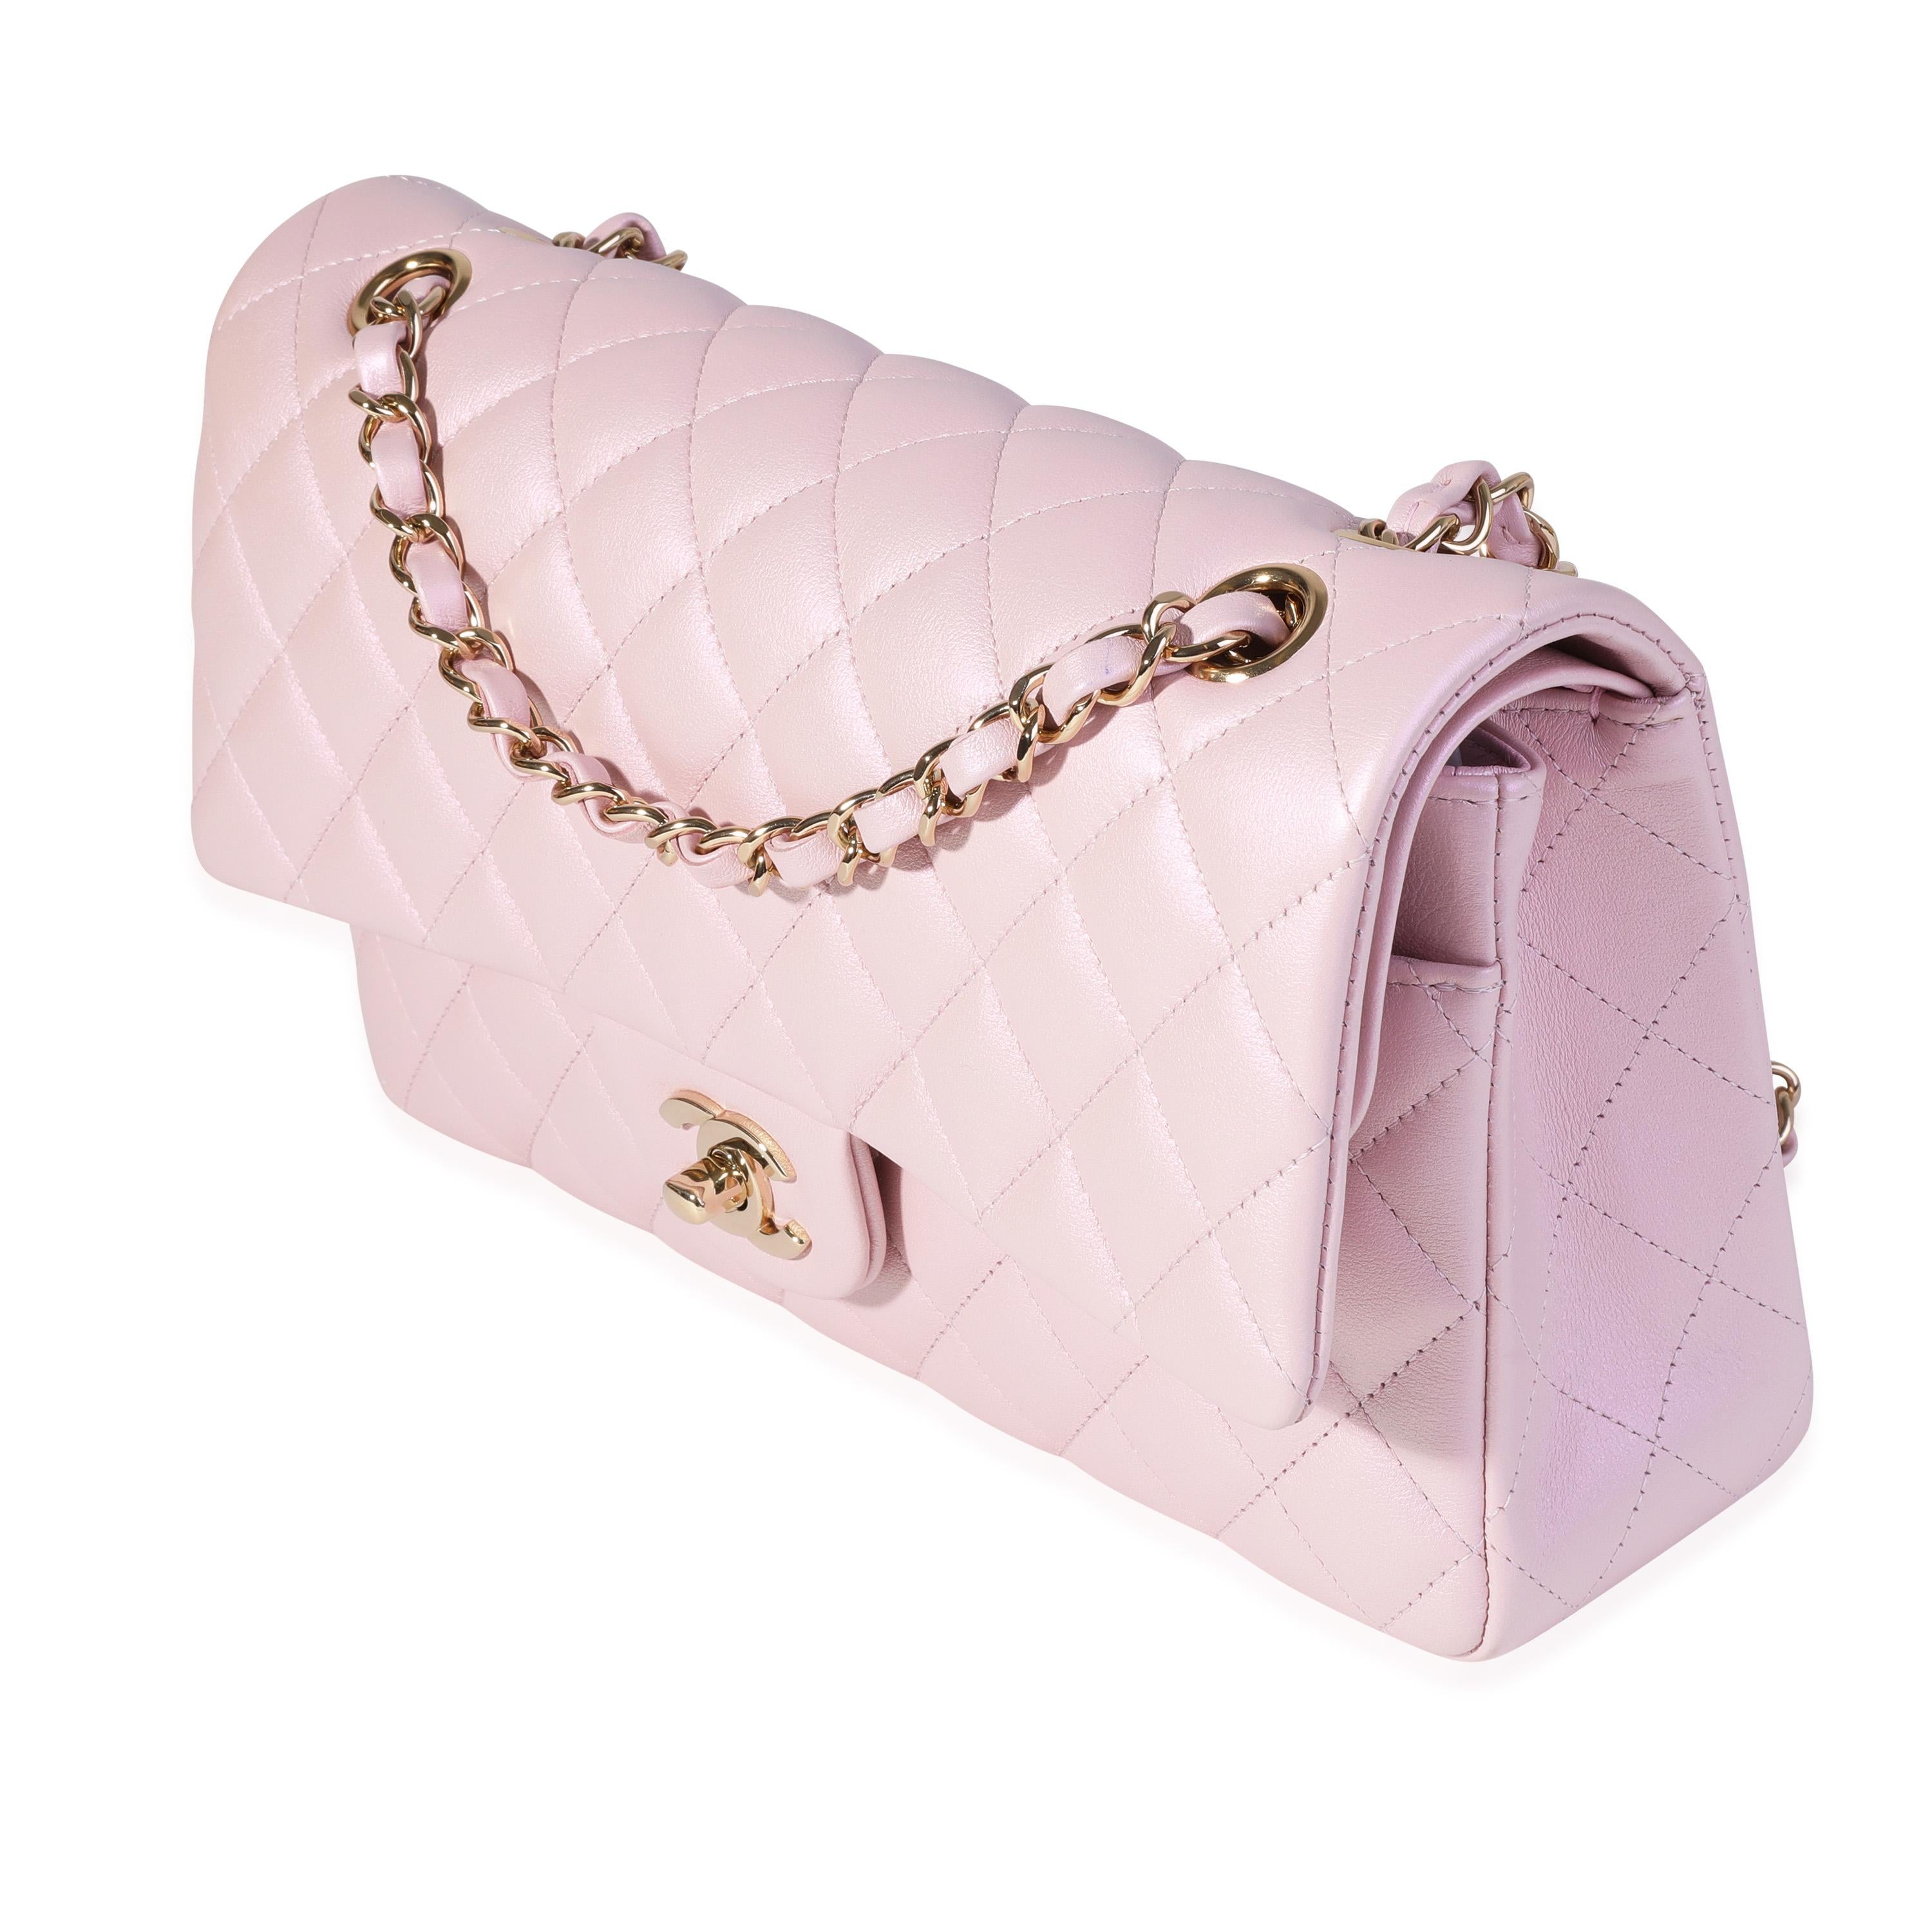 quilted lambskin chanel bag in iridescent pink